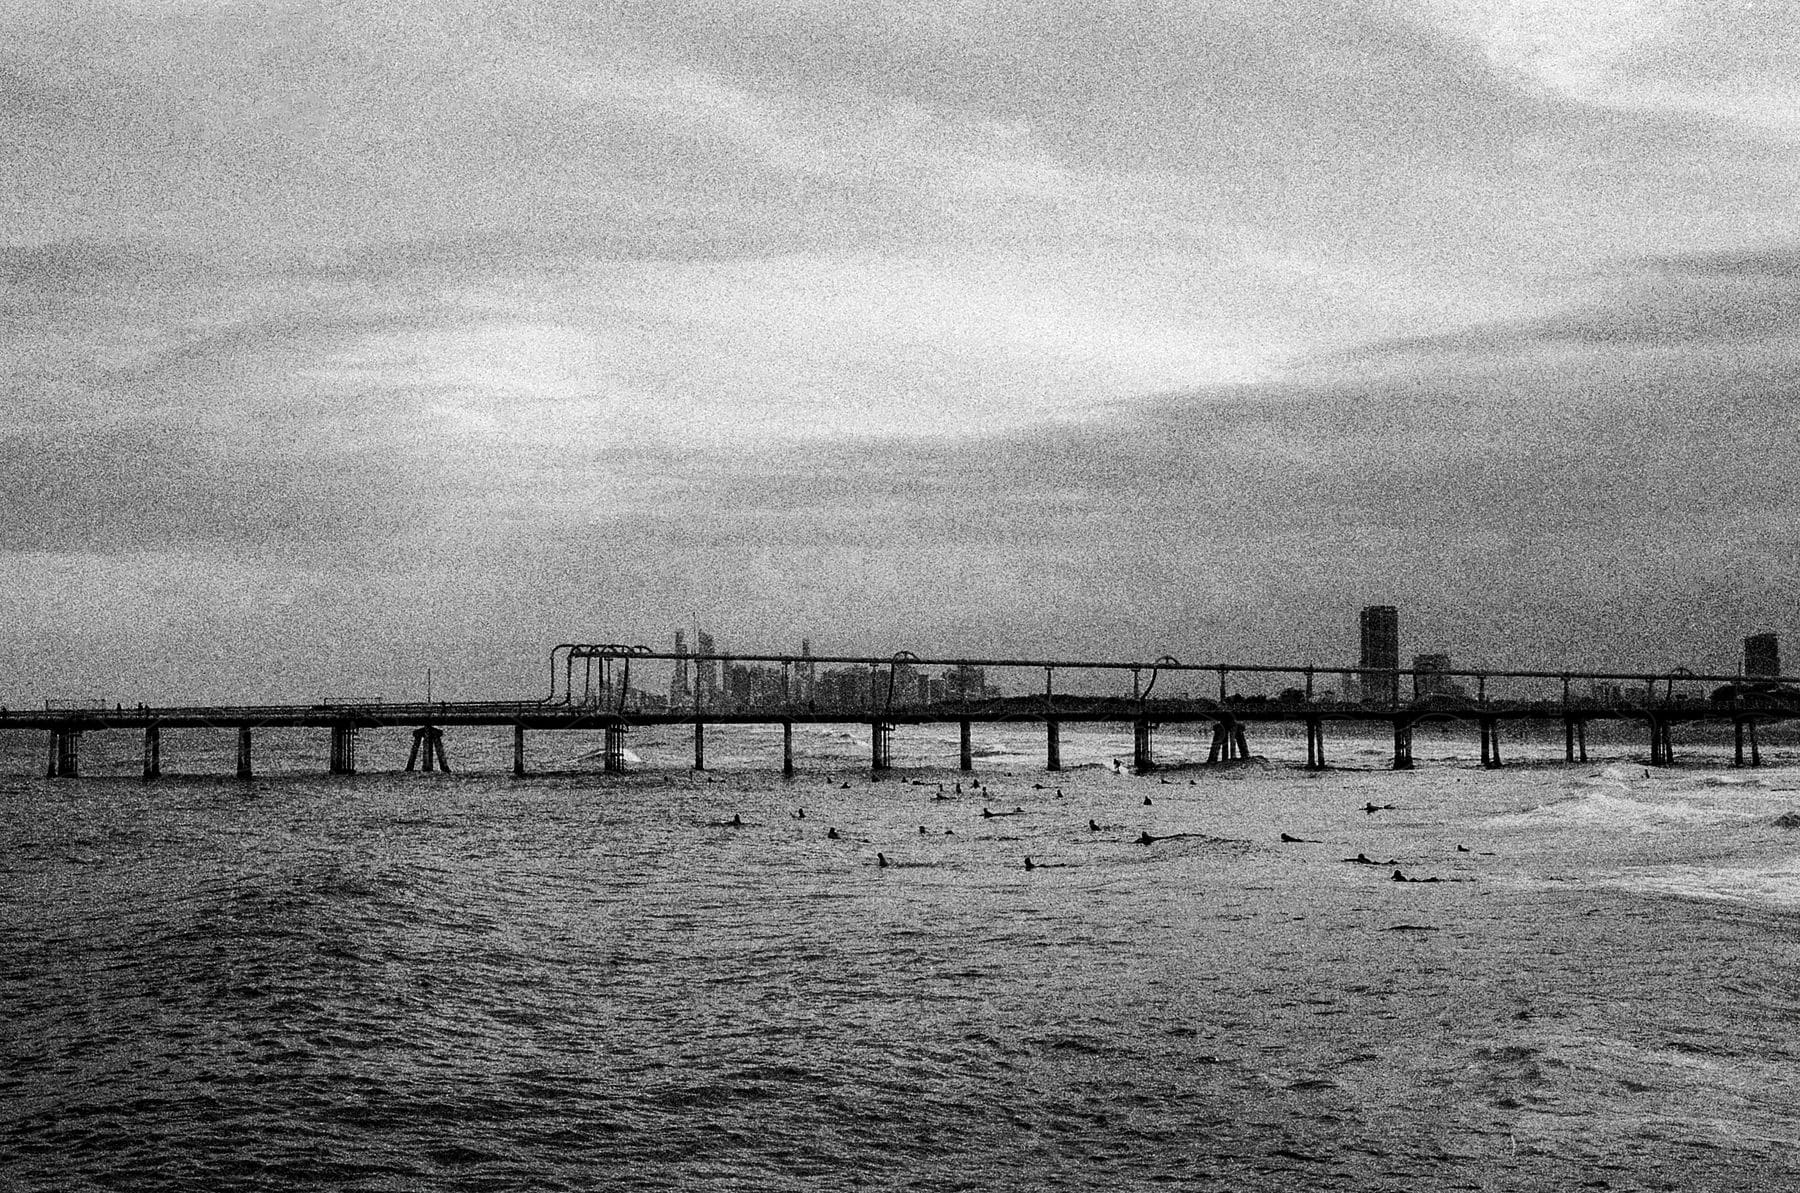 People swim in water near silhouetted pier a distance from skyline on a cloudy day.